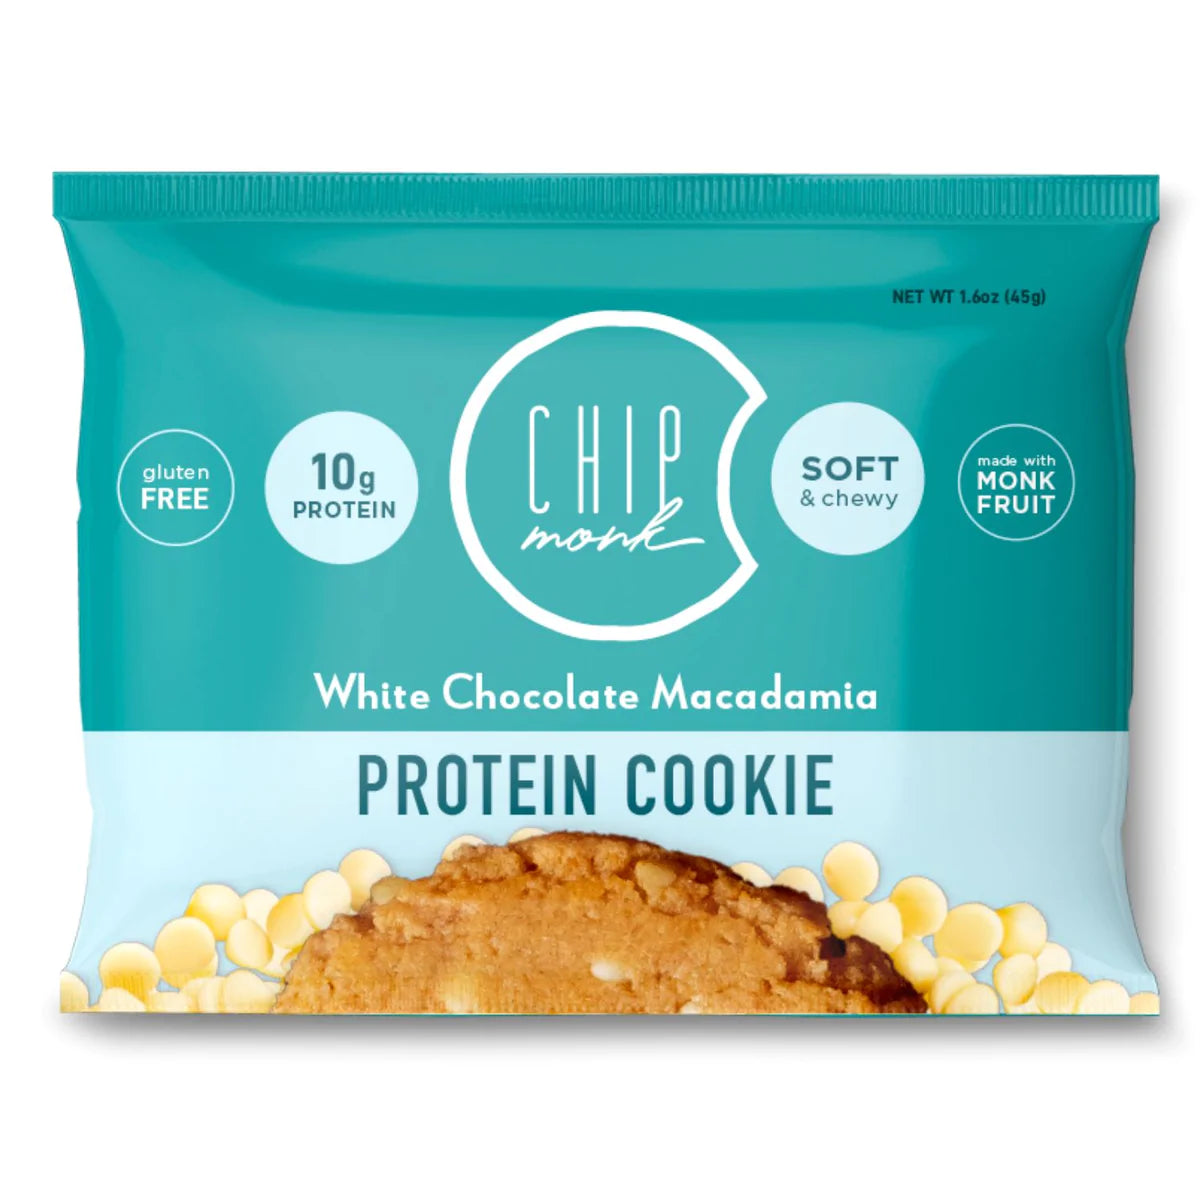 Healthy Protein Cookies by Chipmonk Baking